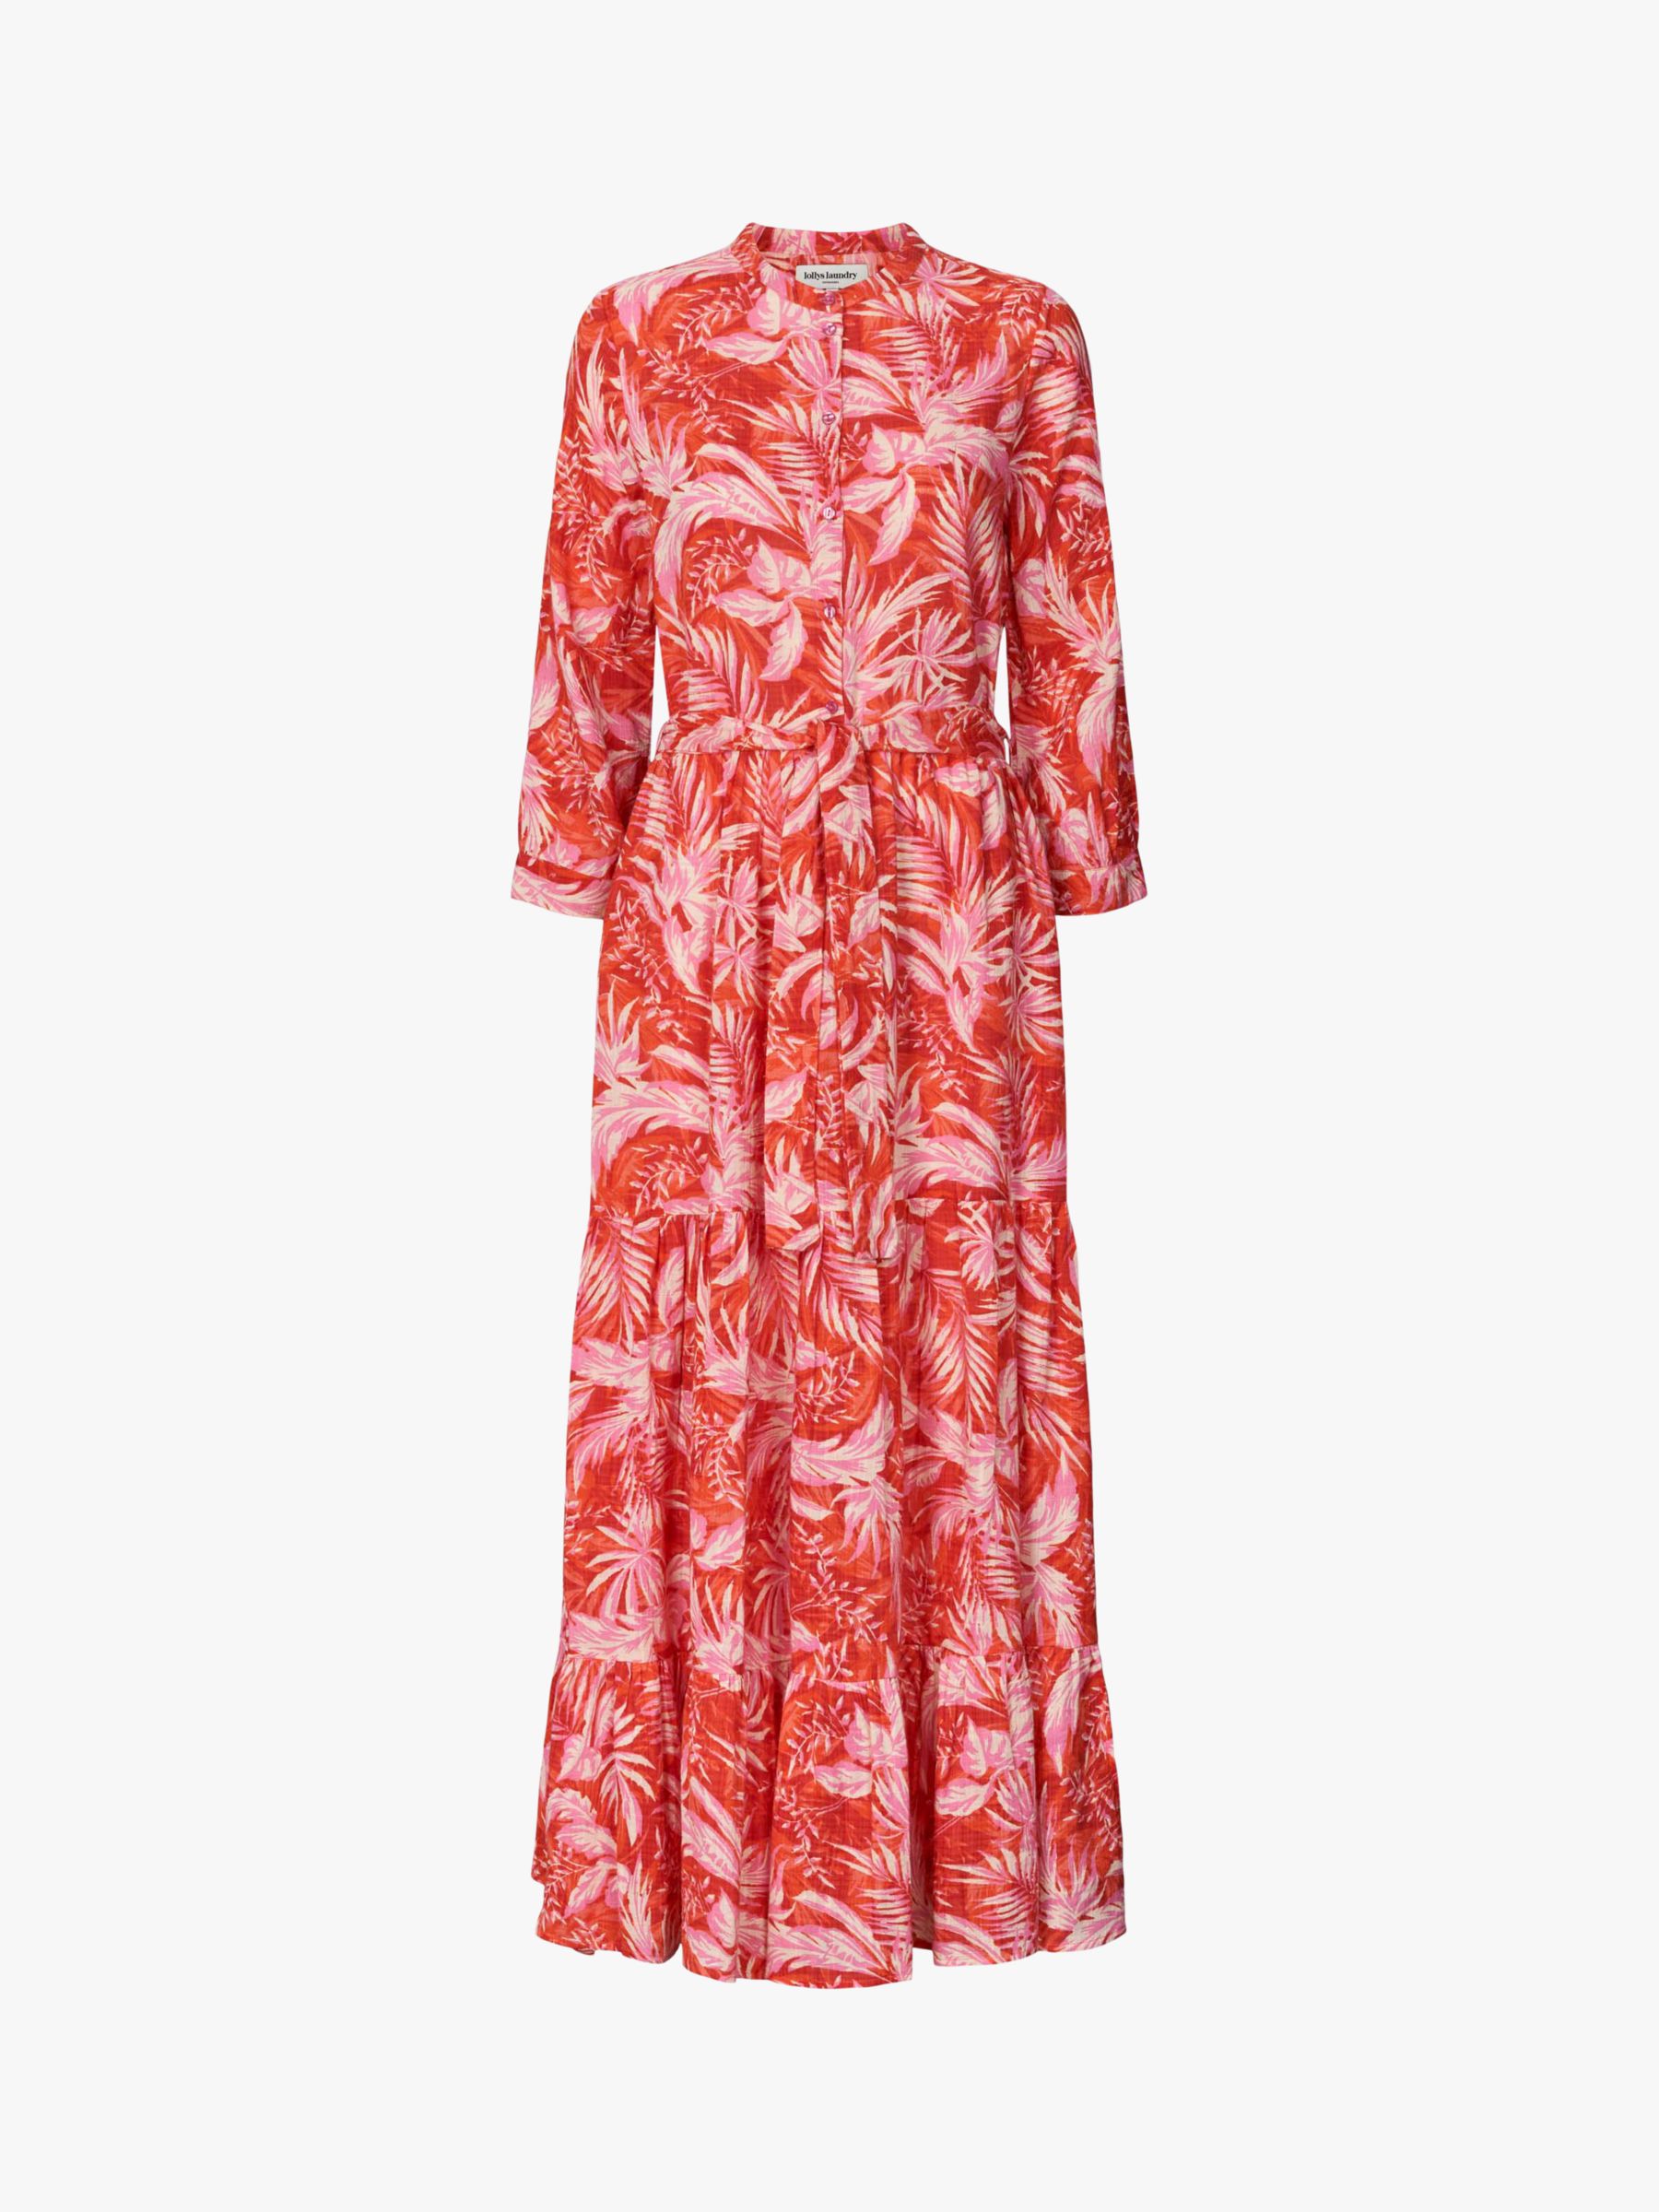 Lollys Laundry Nee 3/4 Sleeve Maxi Dress Nee, Red at John Lewis & Partners